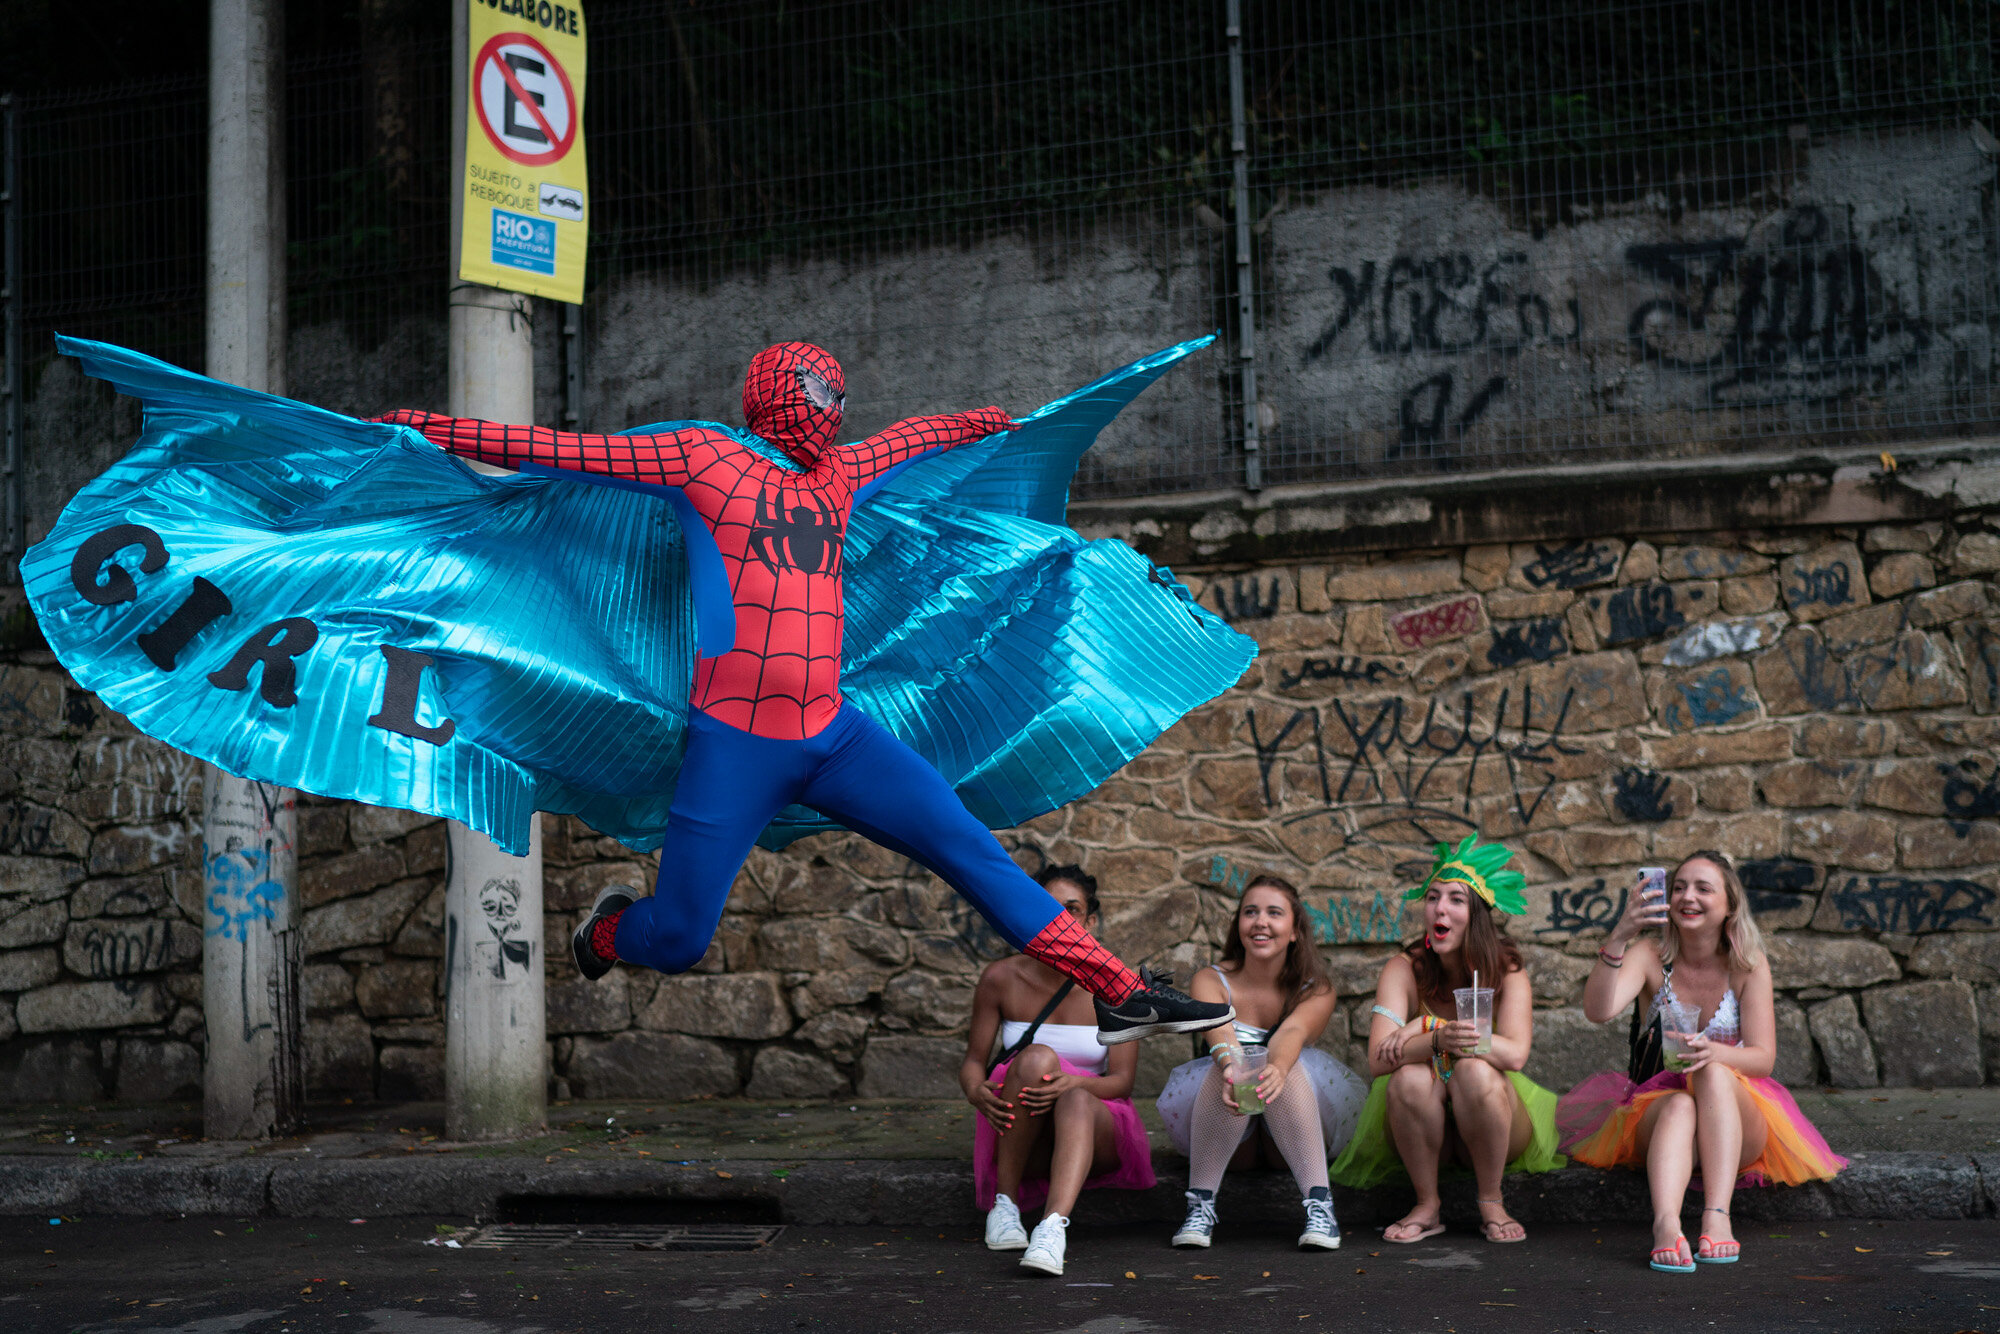  A reveler dressed in a Spider-Man costume strikes a pose at the "Ceu na Terra" or Heaven on Earth street party in Rio de Janeiro, Brazil on Feb. 22, 2020, during the Carnival celebration. (AP Photo/Leo Correa) 